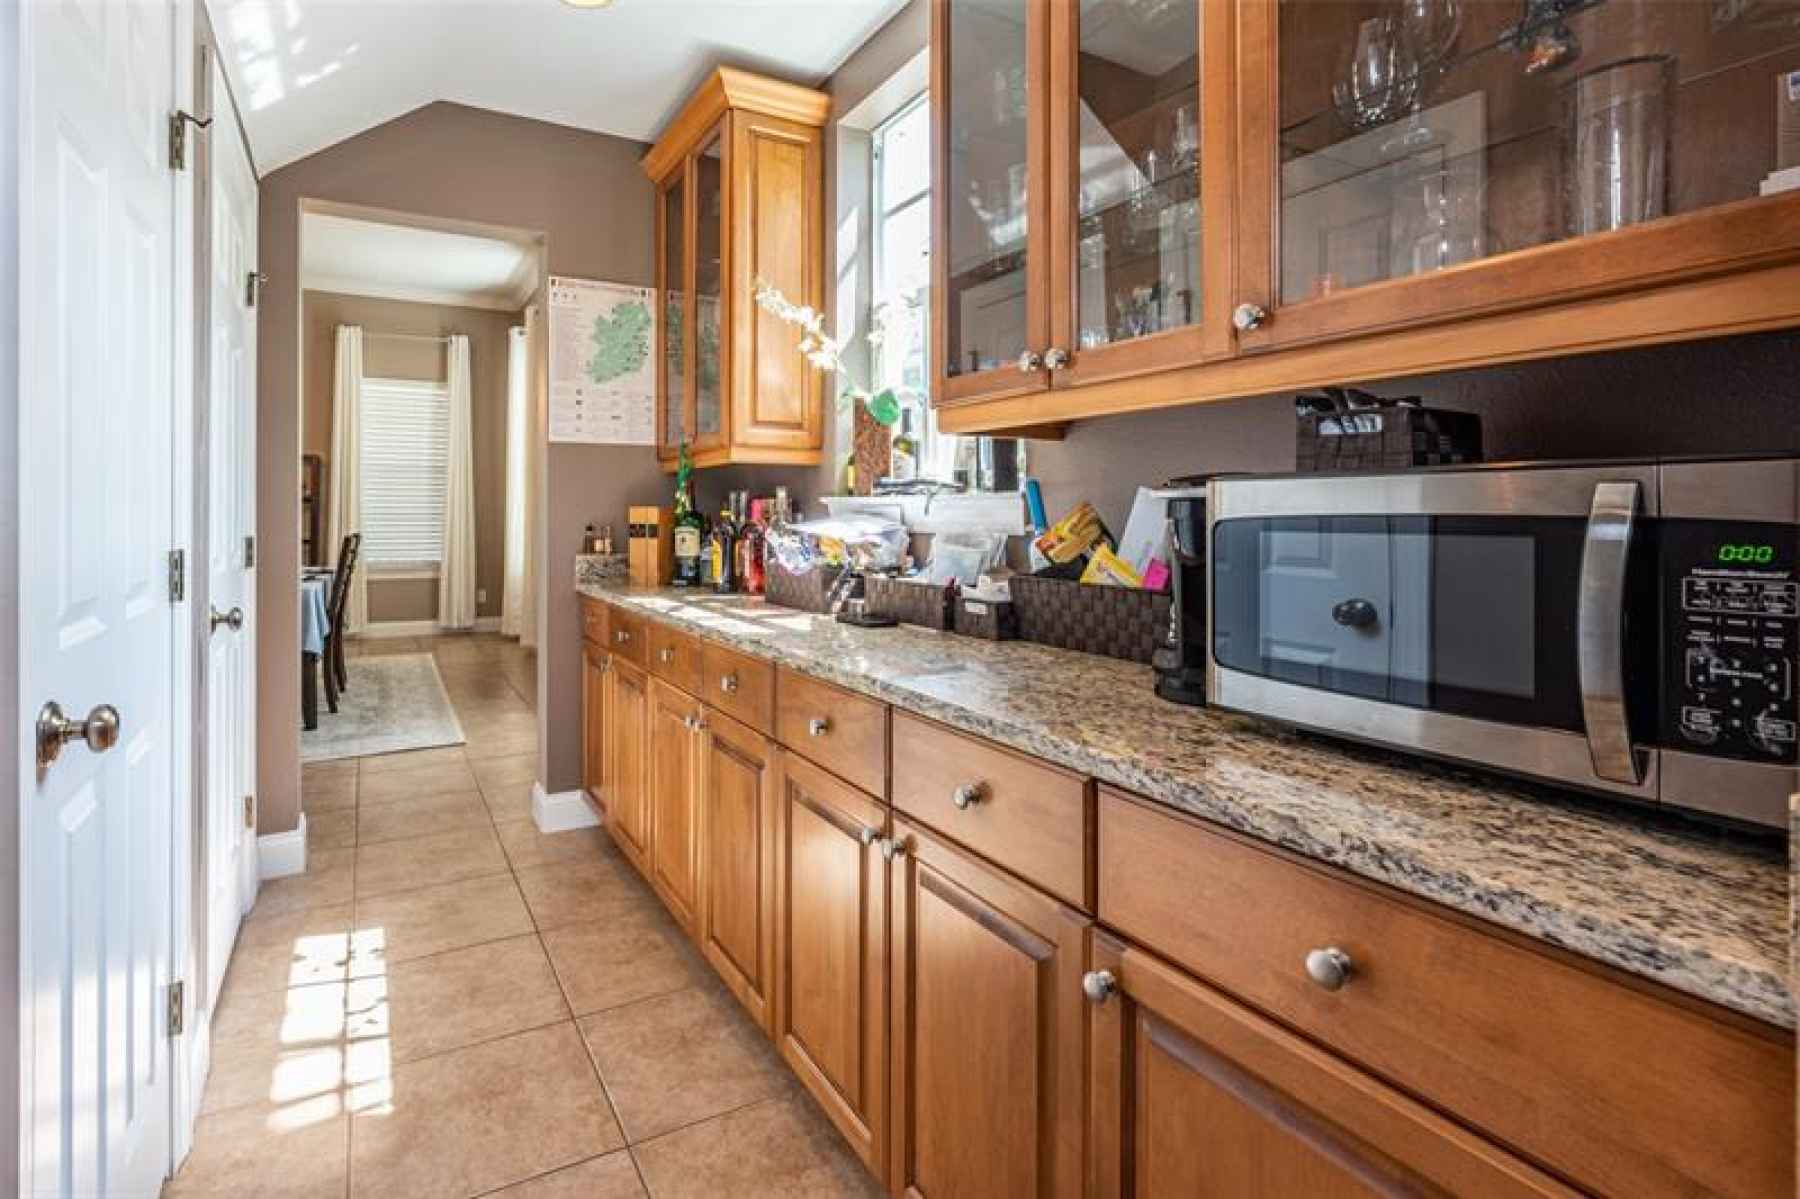 Expansive butlers pantry running between the kitchen to the dining room.  Tons of cabinet space and 